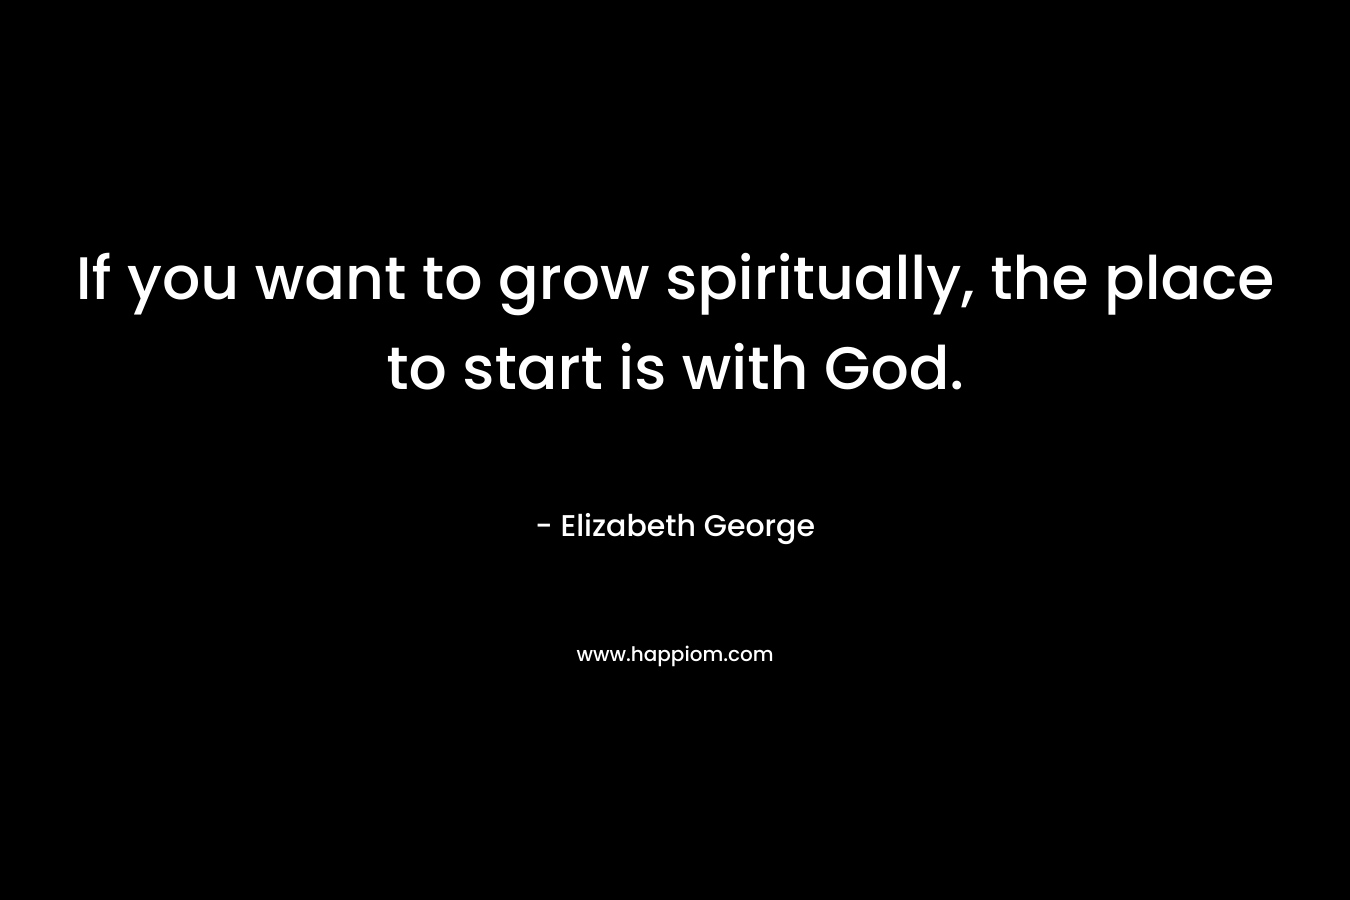 If you want to grow spiritually, the place to start is with God. – Elizabeth George